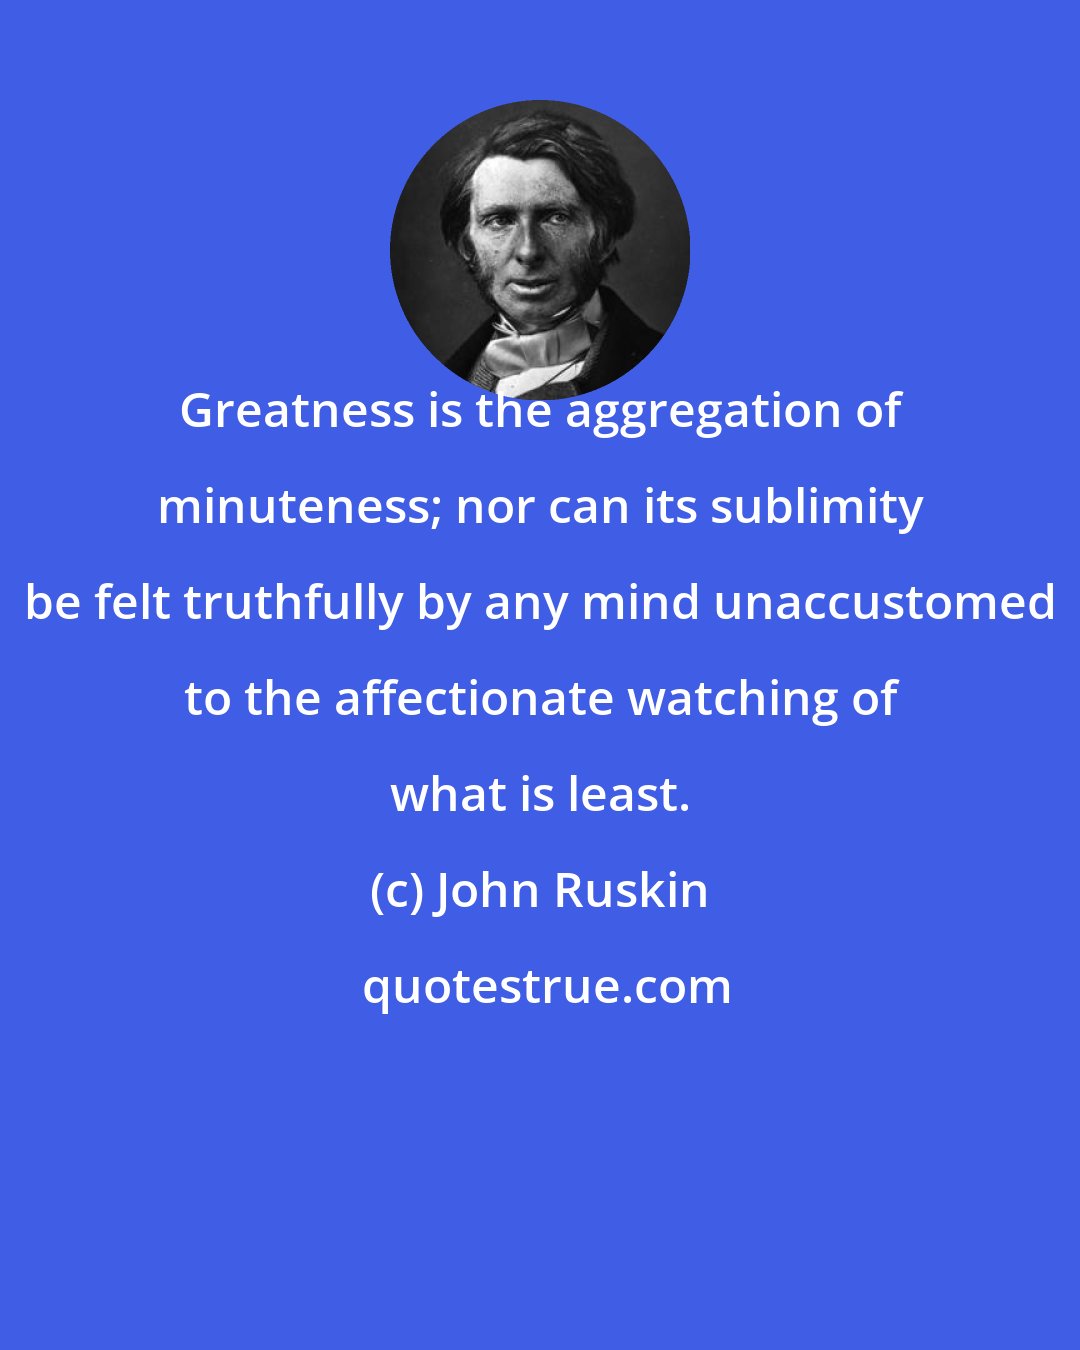 John Ruskin: Greatness is the aggregation of minuteness; nor can its sublimity be felt truthfully by any mind unaccustomed to the affectionate watching of what is least.